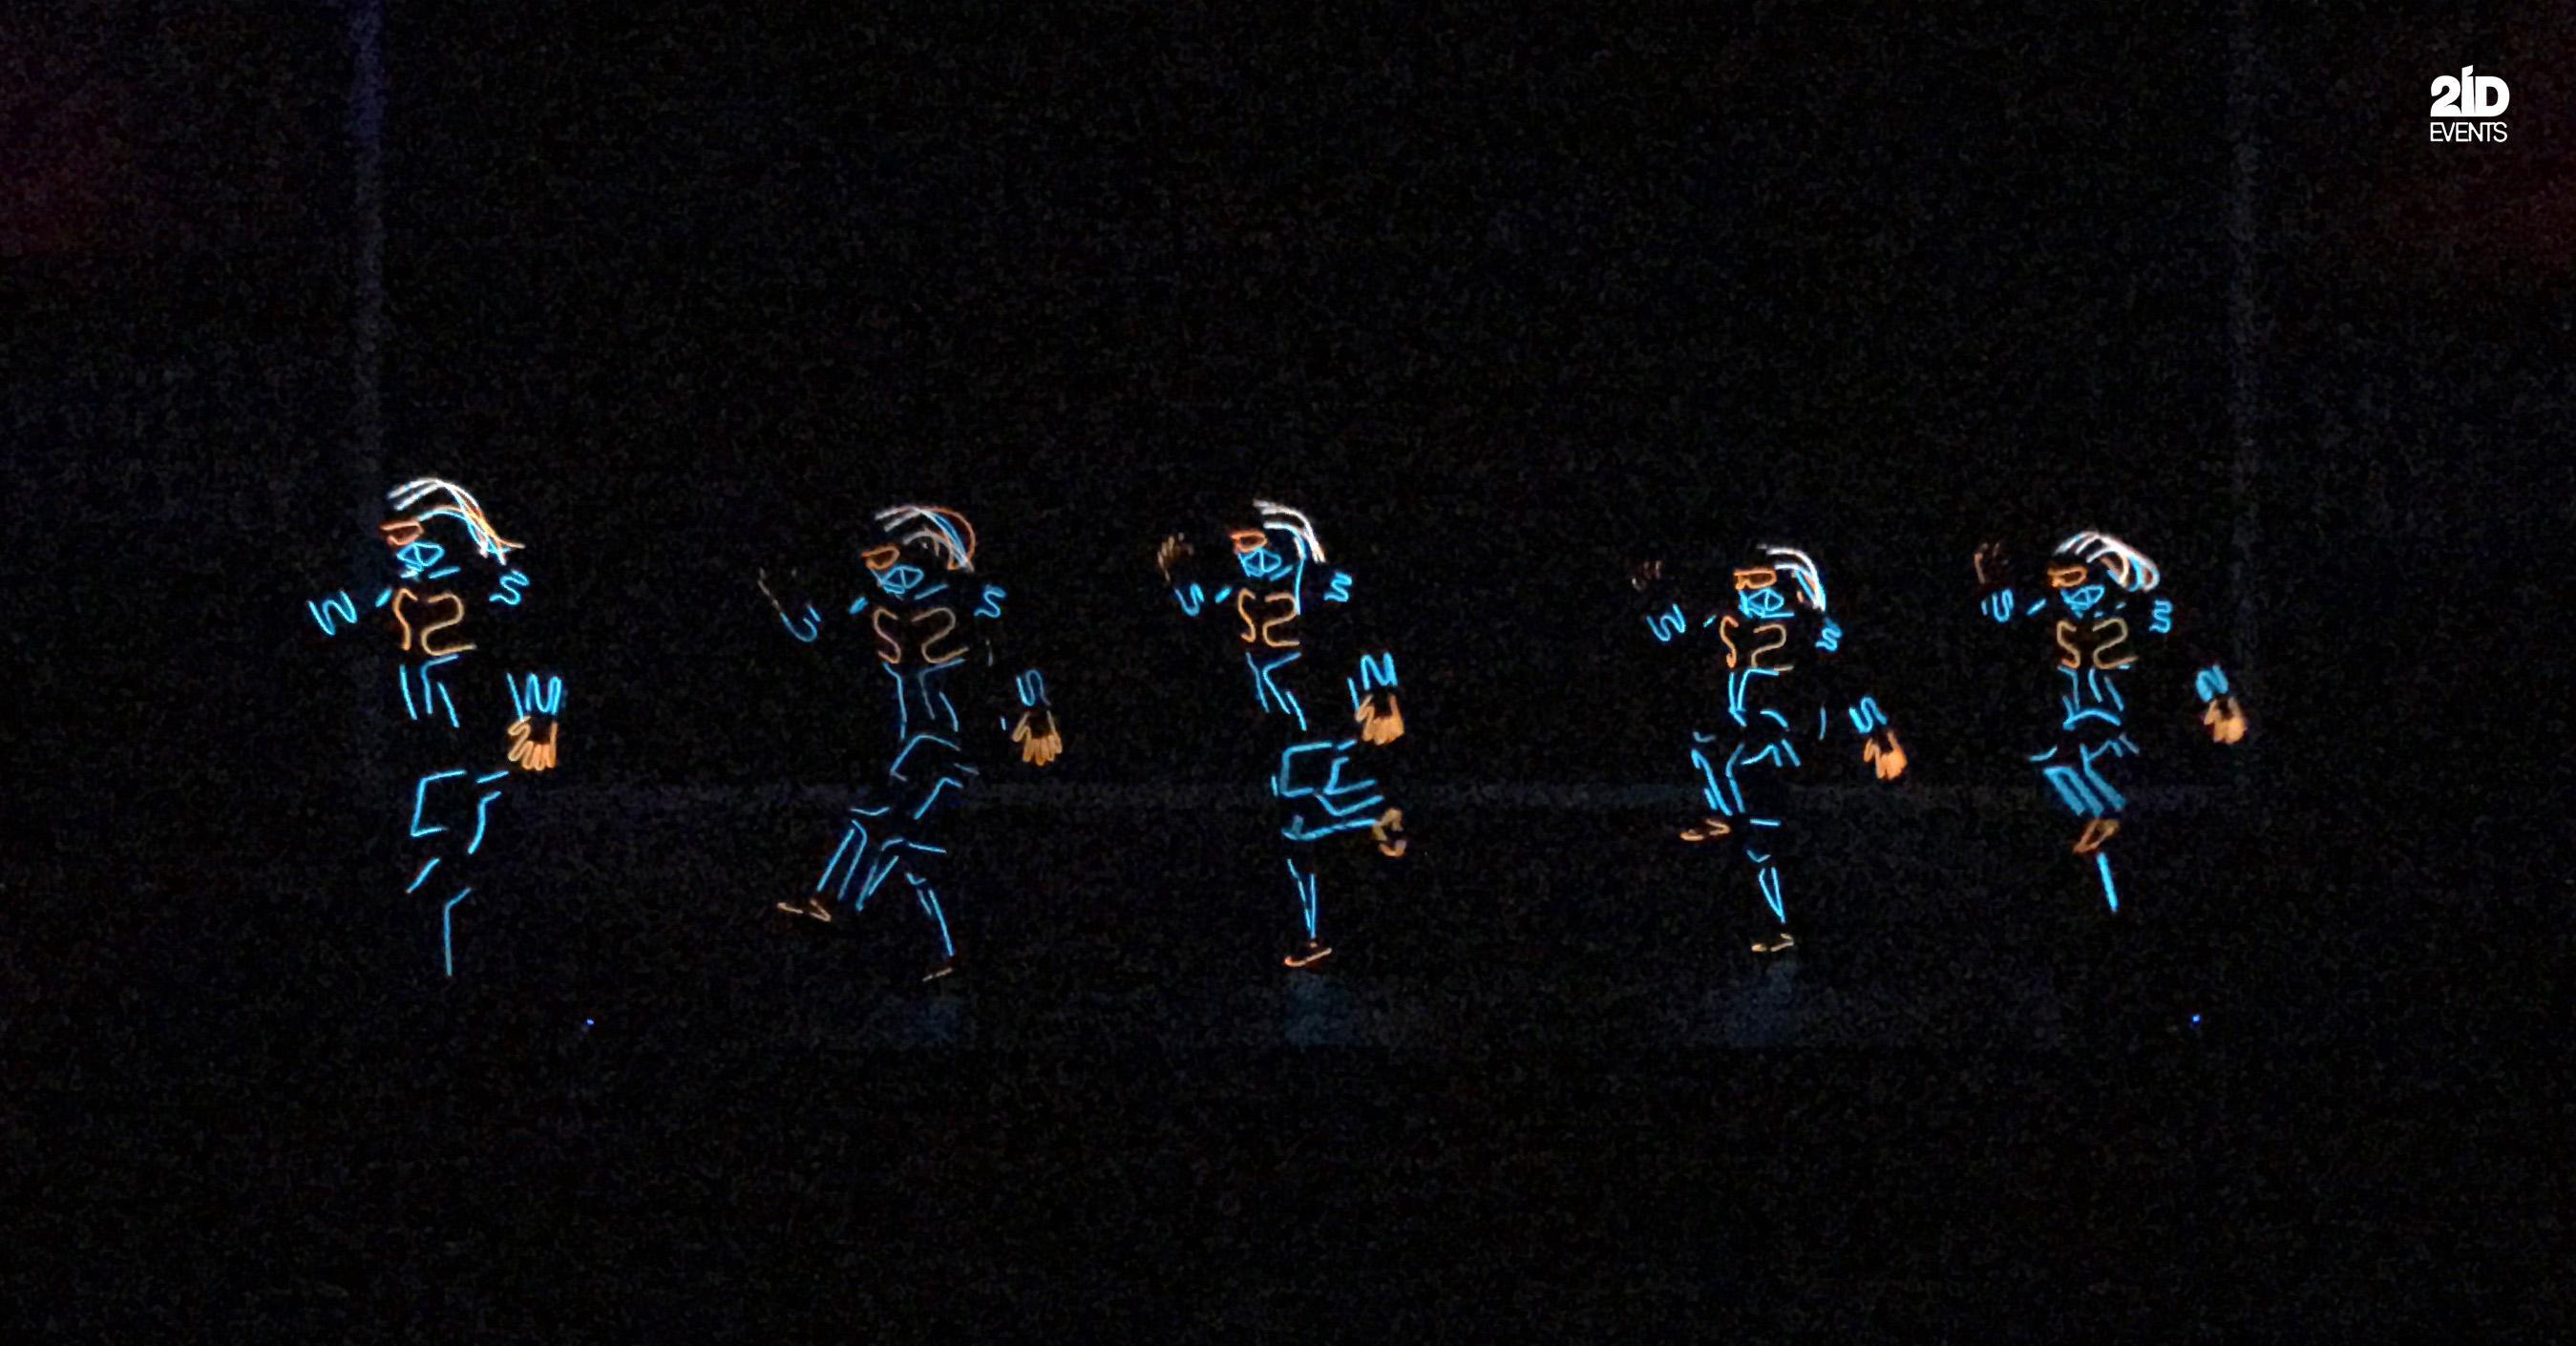 LED ROBOTS SHOW FOR ANNUAL EVENT